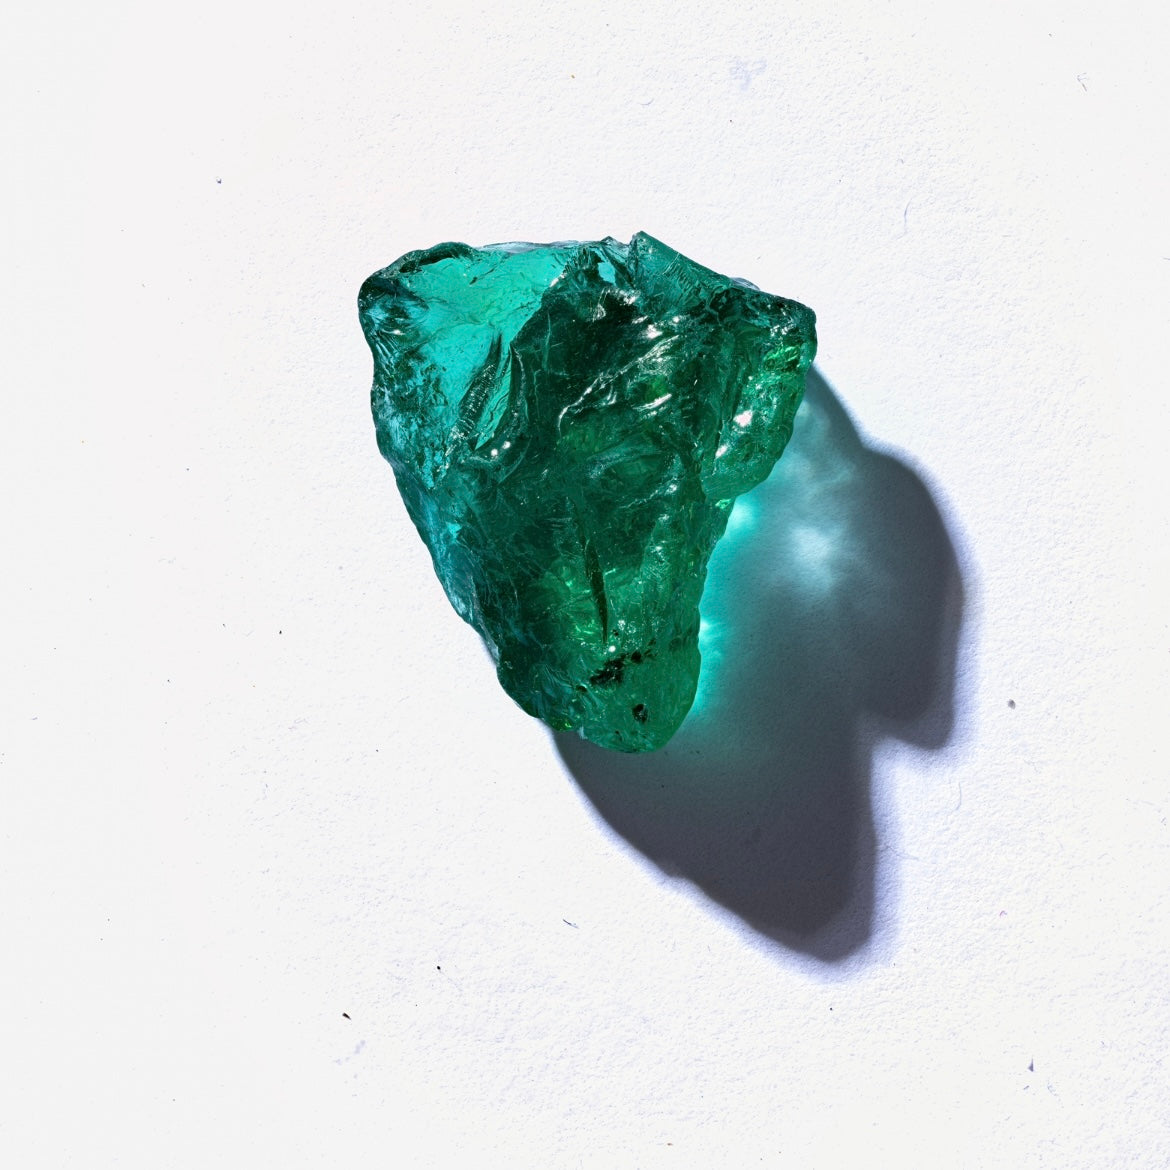 Celebrate the unique beauty of Zambian Emeralds with our exclusive Gemfields collection